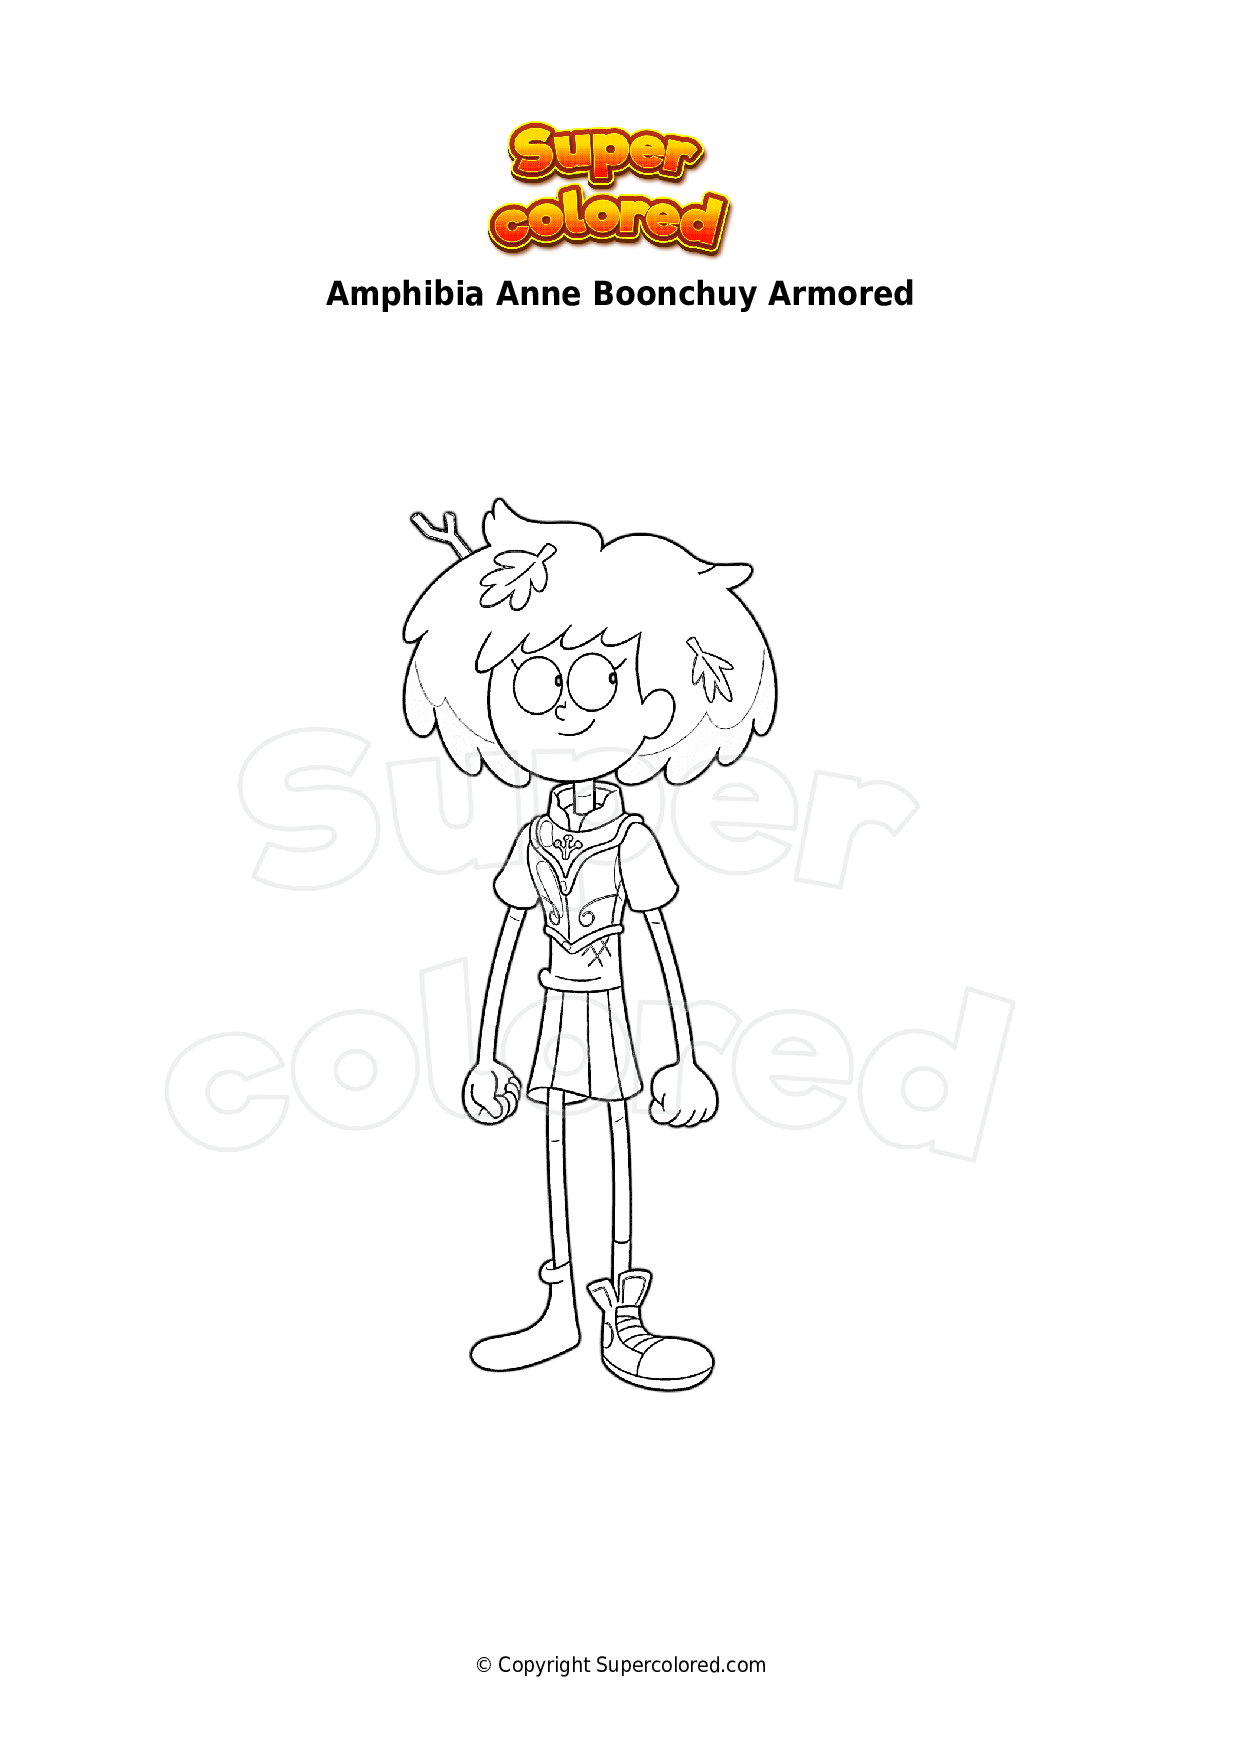 Coloring Page Amphibia Anne Boonchuy Armored Supercolored